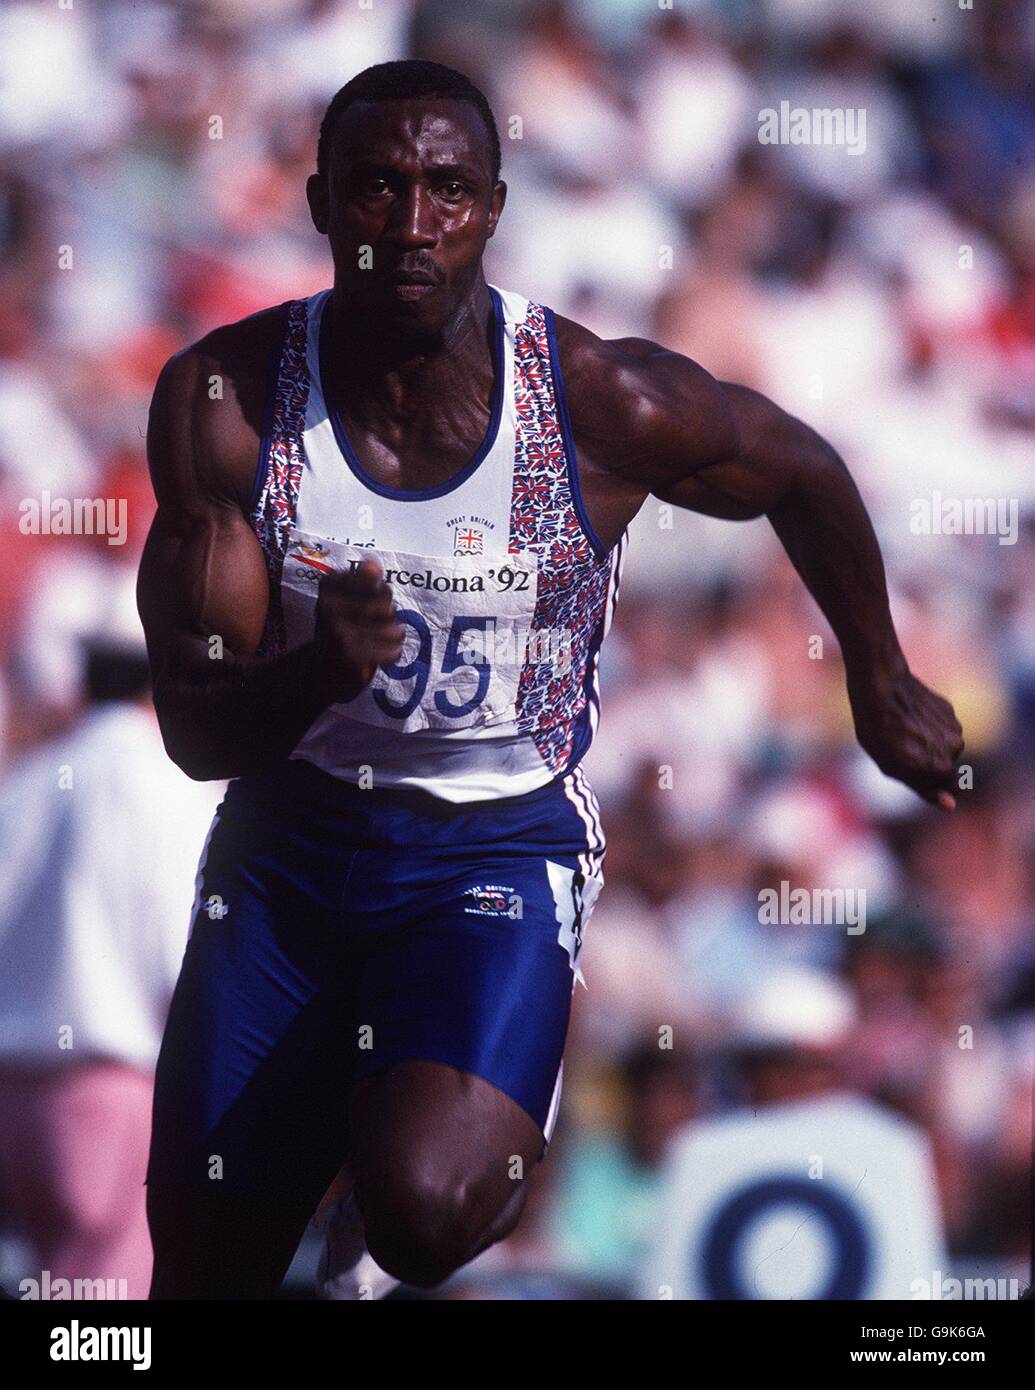 Athletics - Barcelona Olympic Games 1992 - Men's 100m. Great Britain's Linford Christie in action Stock Photo